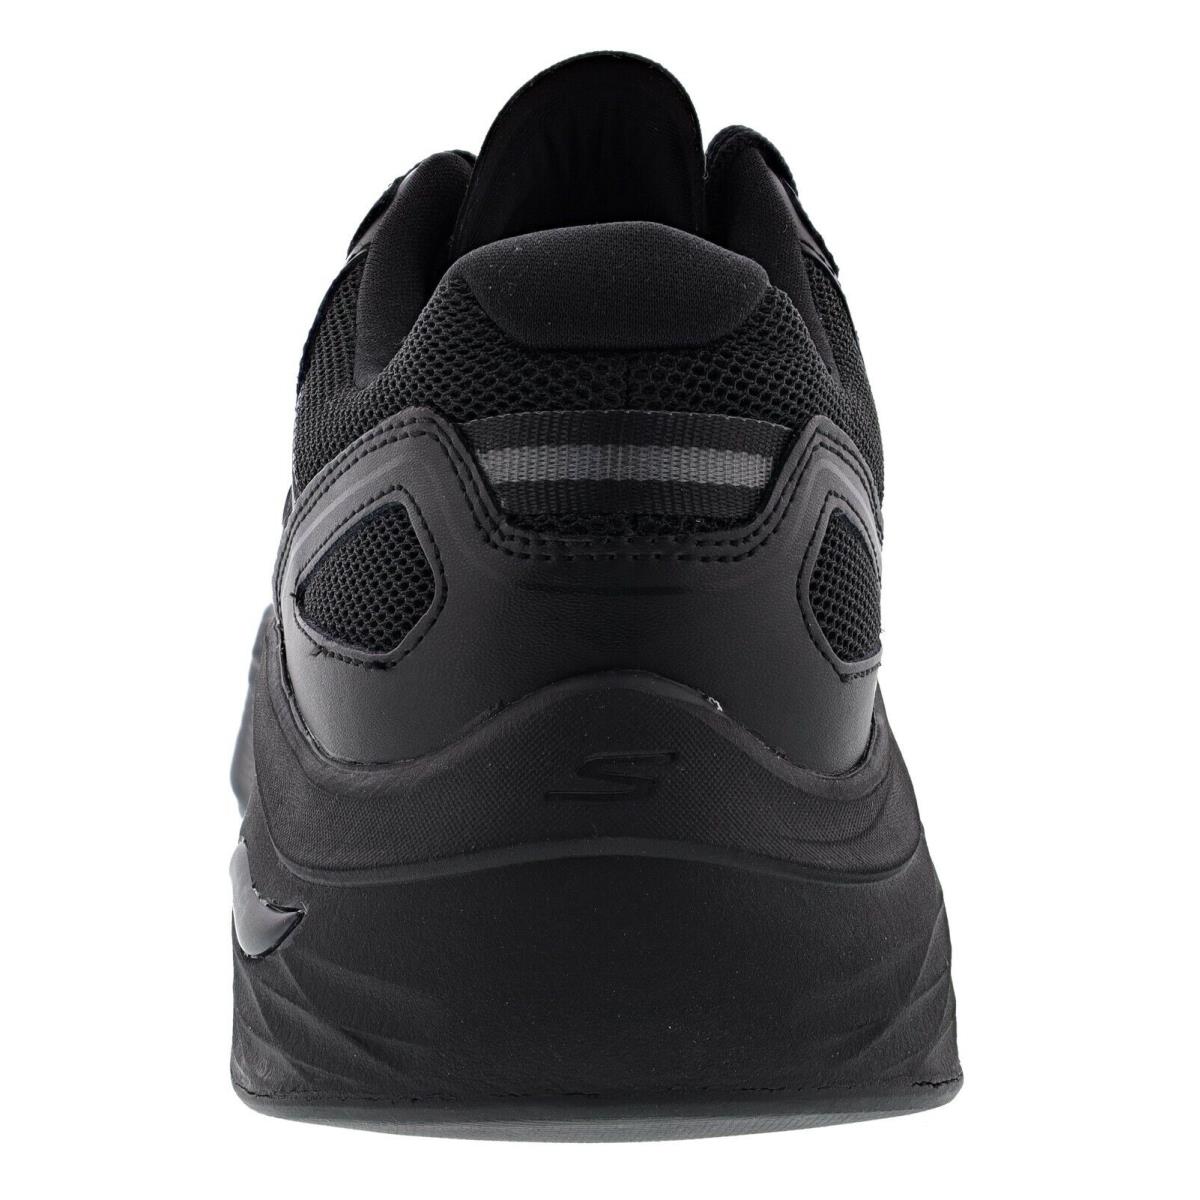 Skechers shoes Arch Rugged Man 2